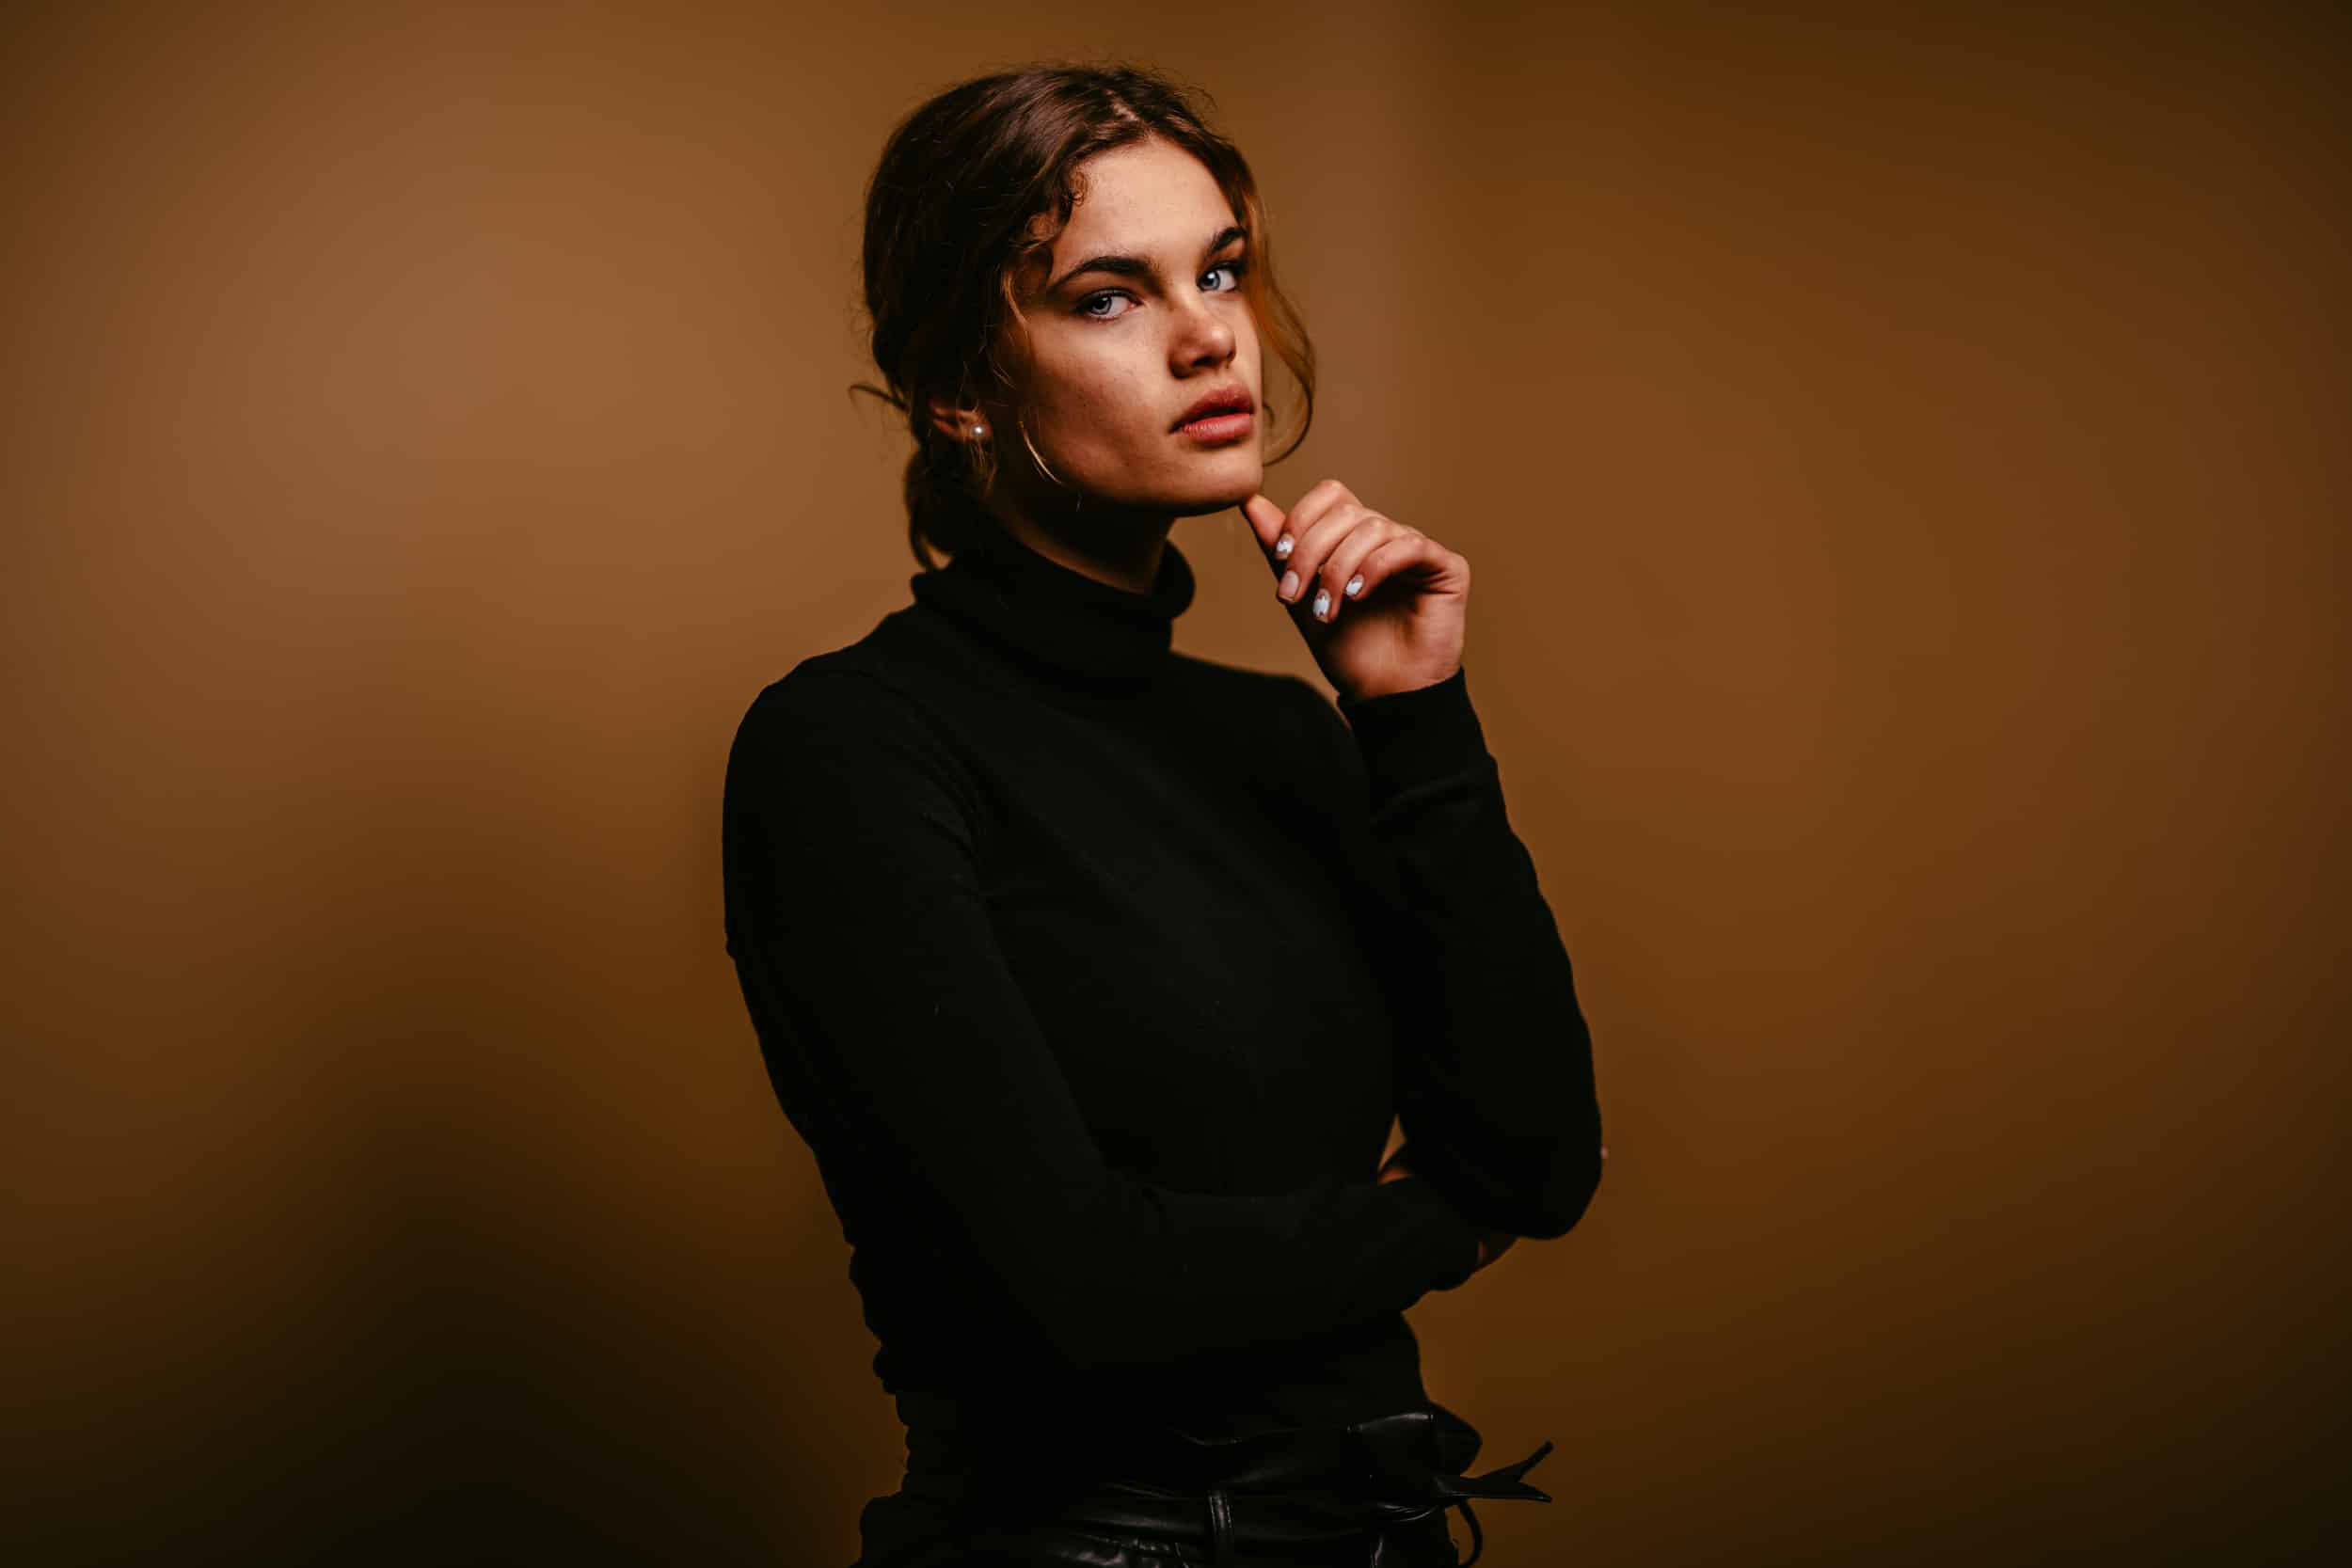 A young woman in a black turtleneck poses professional portrait photographer with her hand on her chin.